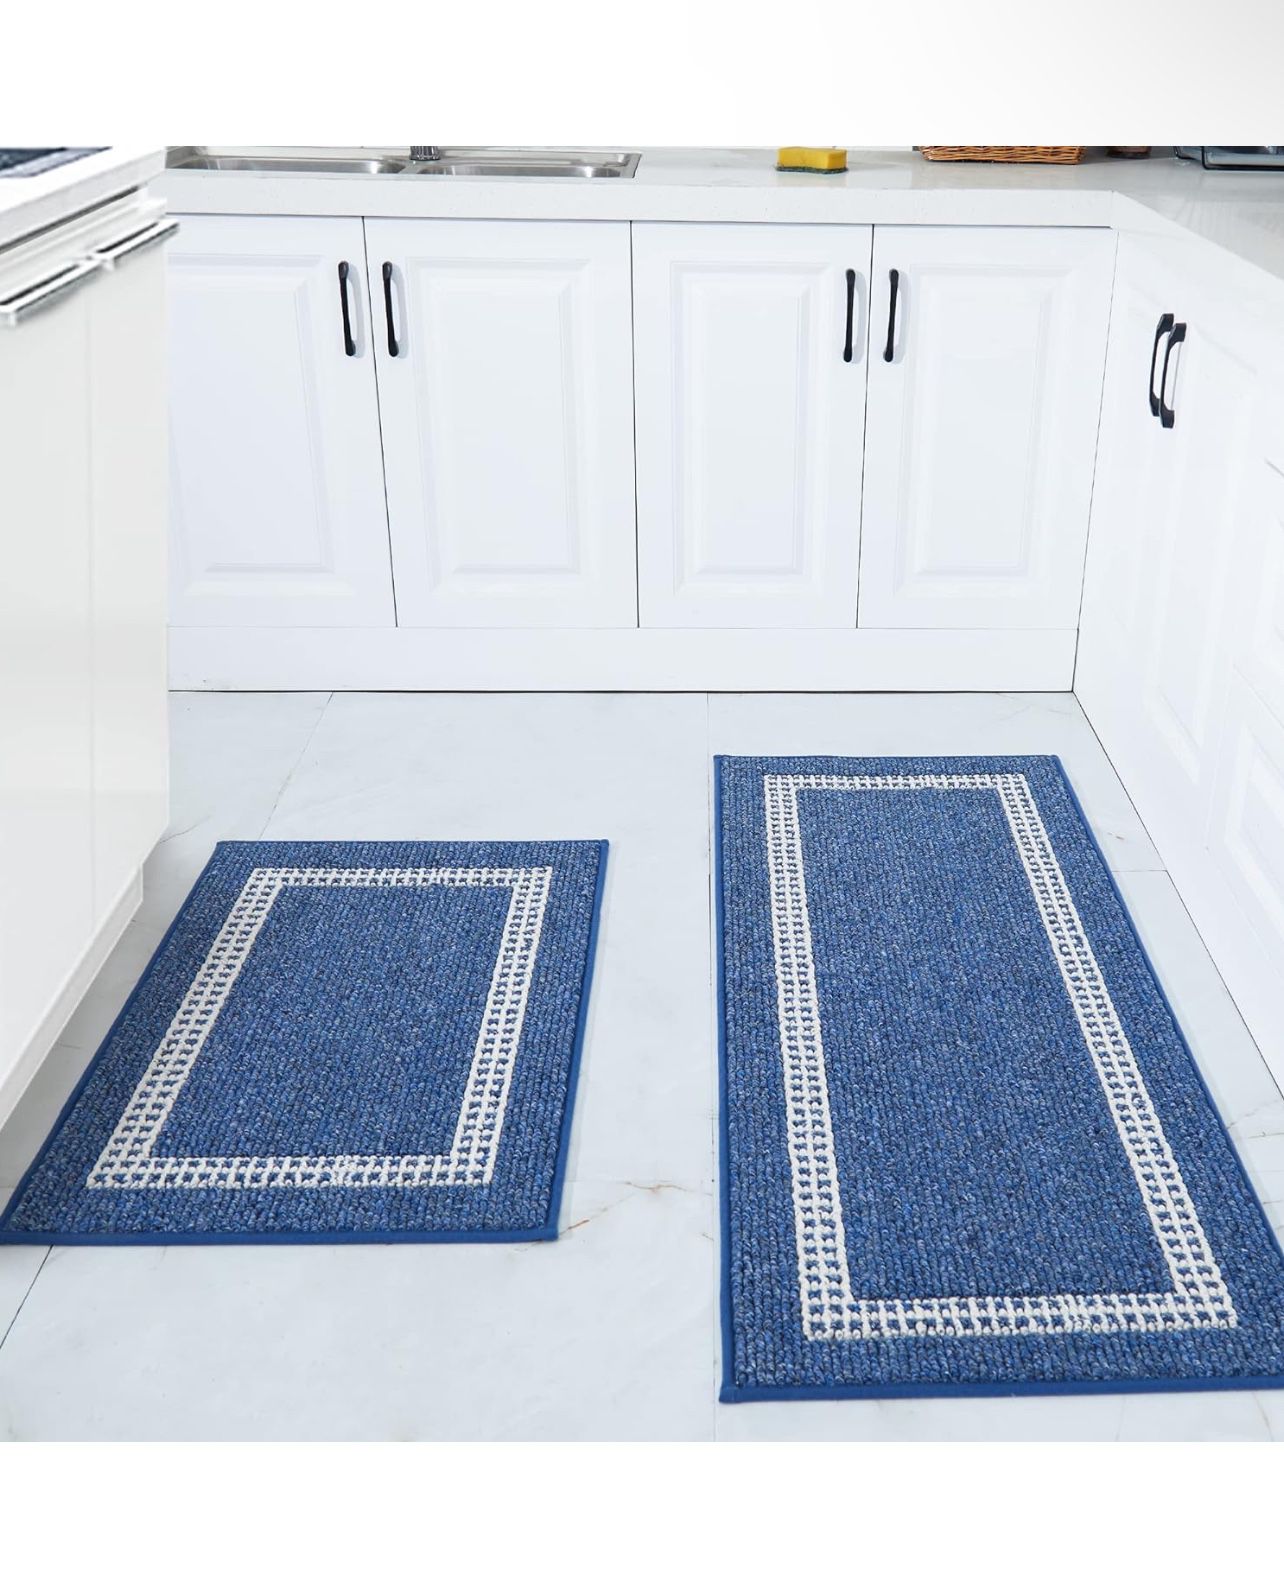 Brandnew  Kitchen Rugs Non-Slip 20x30/20x48 Inch Thick Polypropylene Standing Mat for Home Machine Washable, Blue